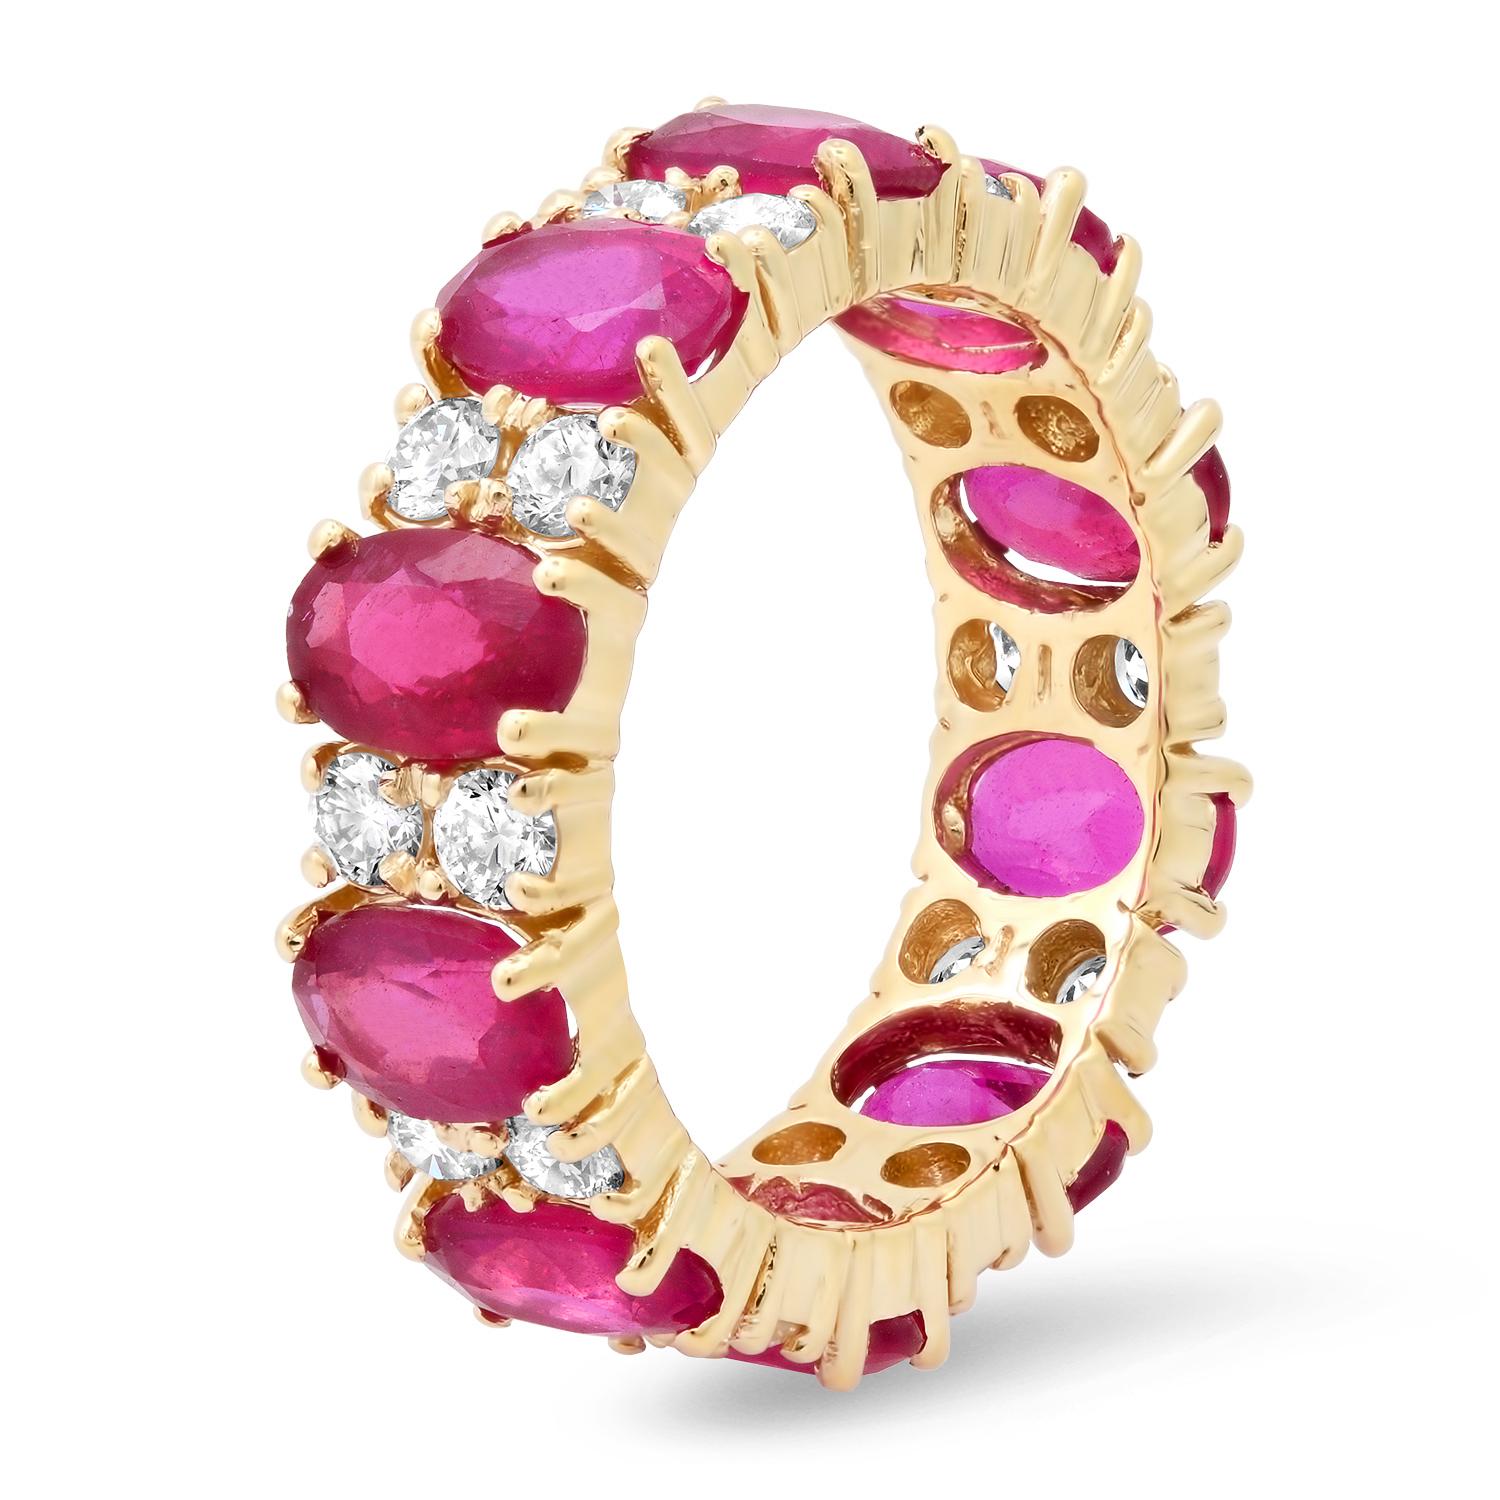 14K Yellow Gold Setting with 6.5ct Ruby and 1.22ct Diamond Band